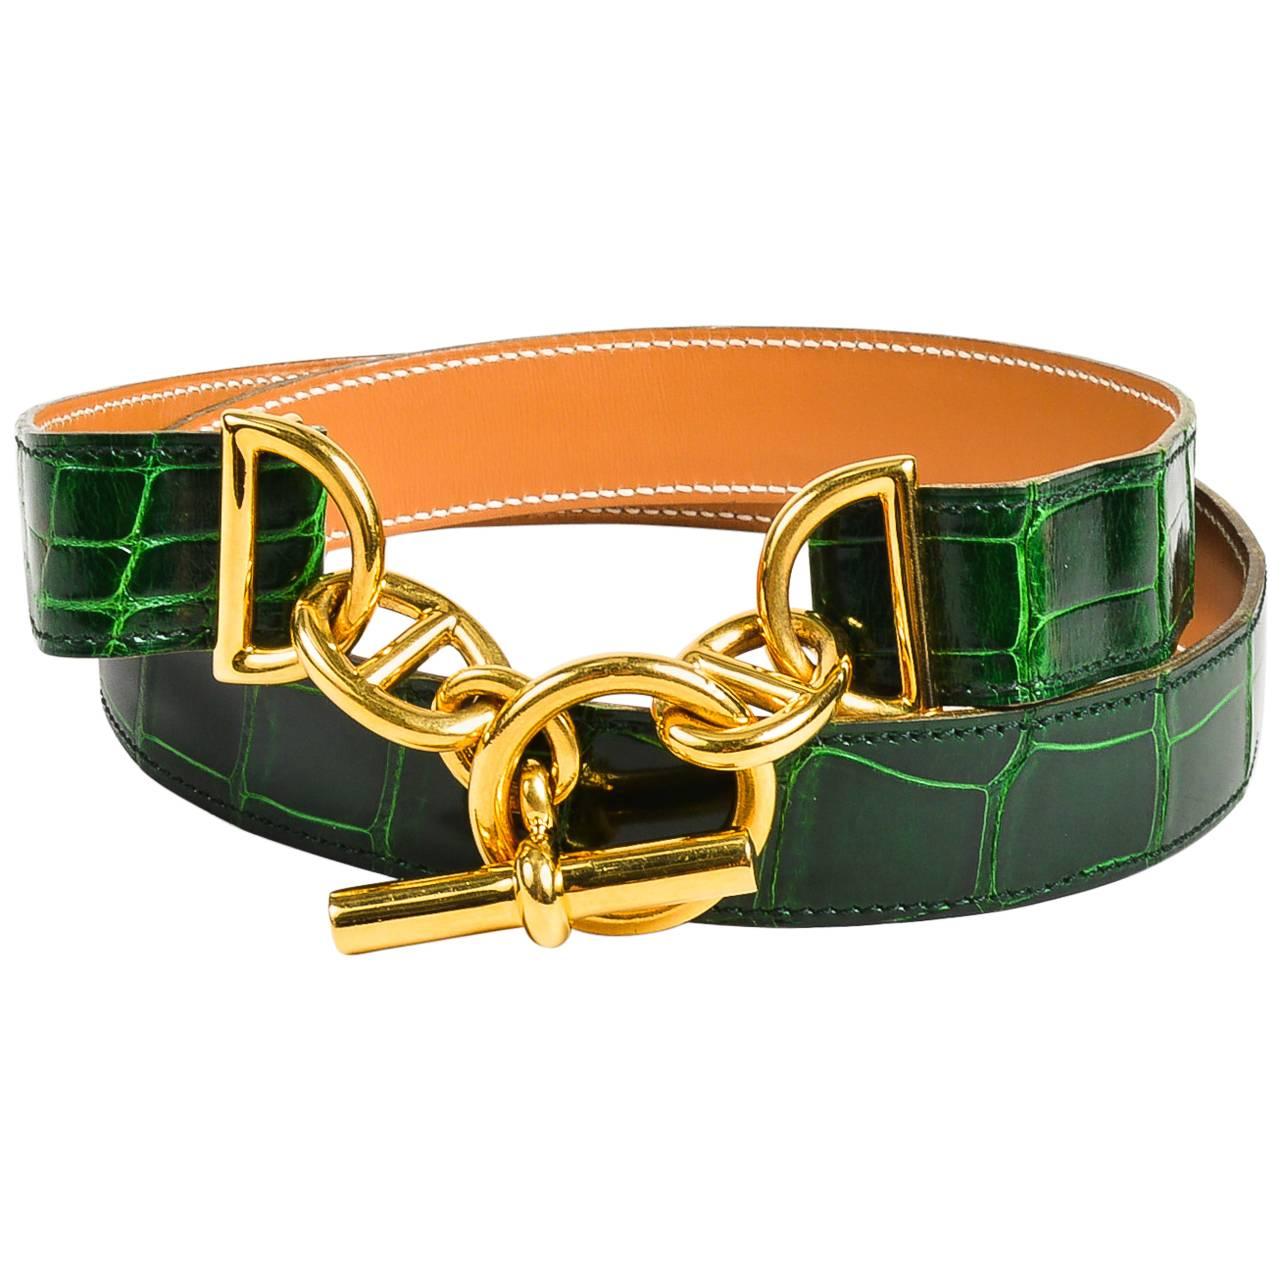 Hermes Green & Gold Tone Alligator Leather "Chaine D'Ancre" Belt Size 80 For Sale